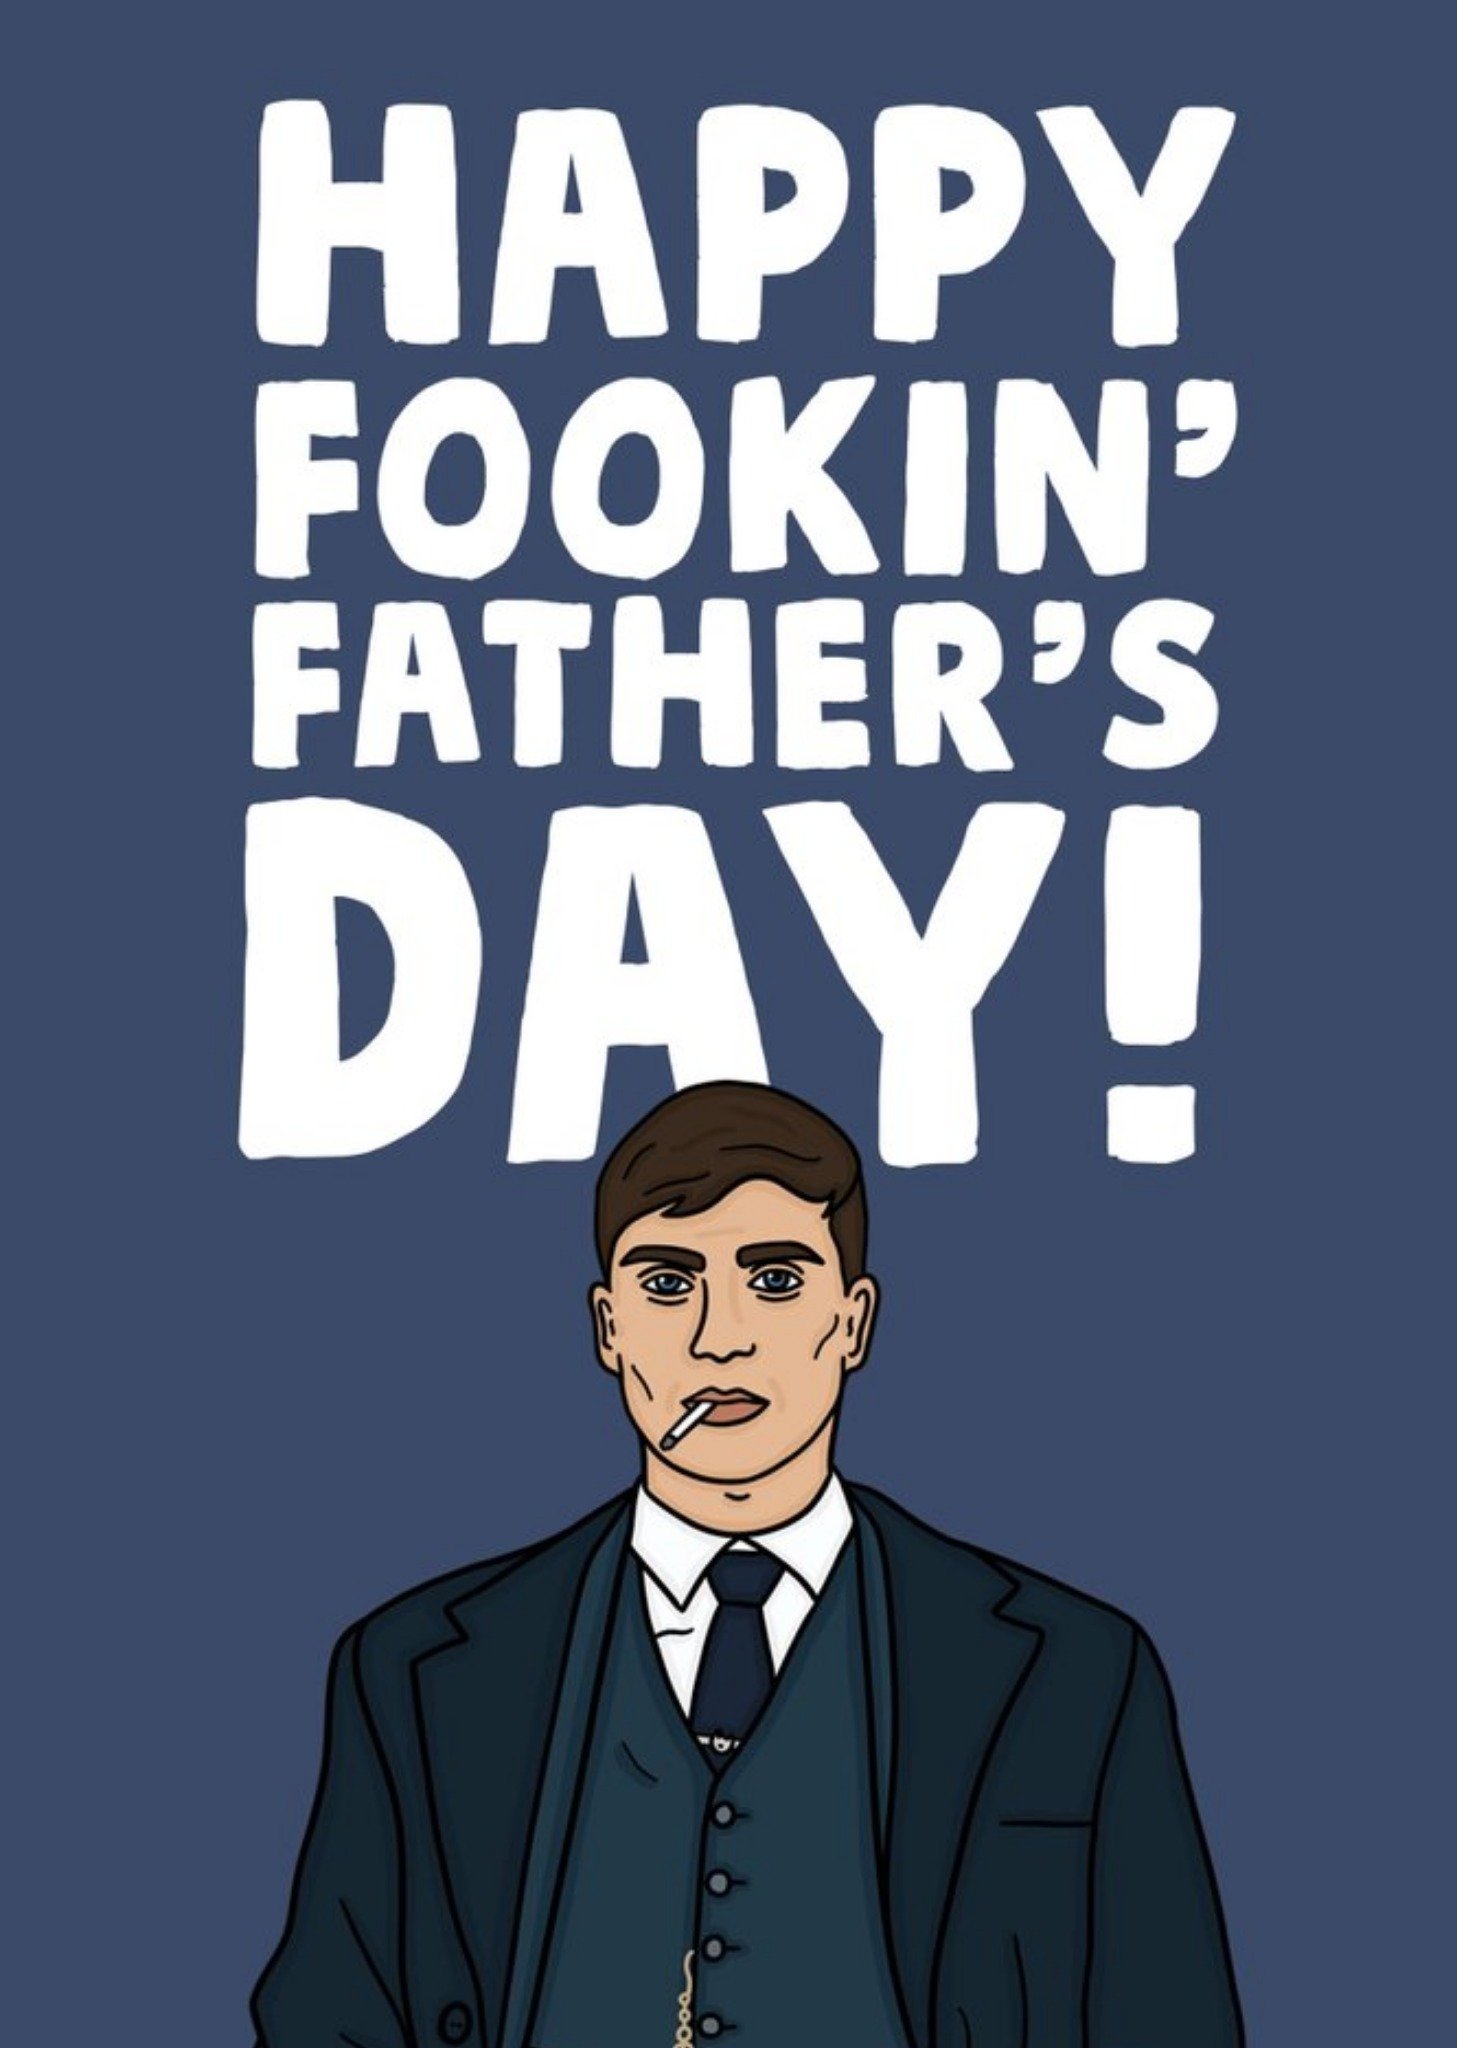 Moonpig Funny Happy Fookin' Father's Day Card, Large